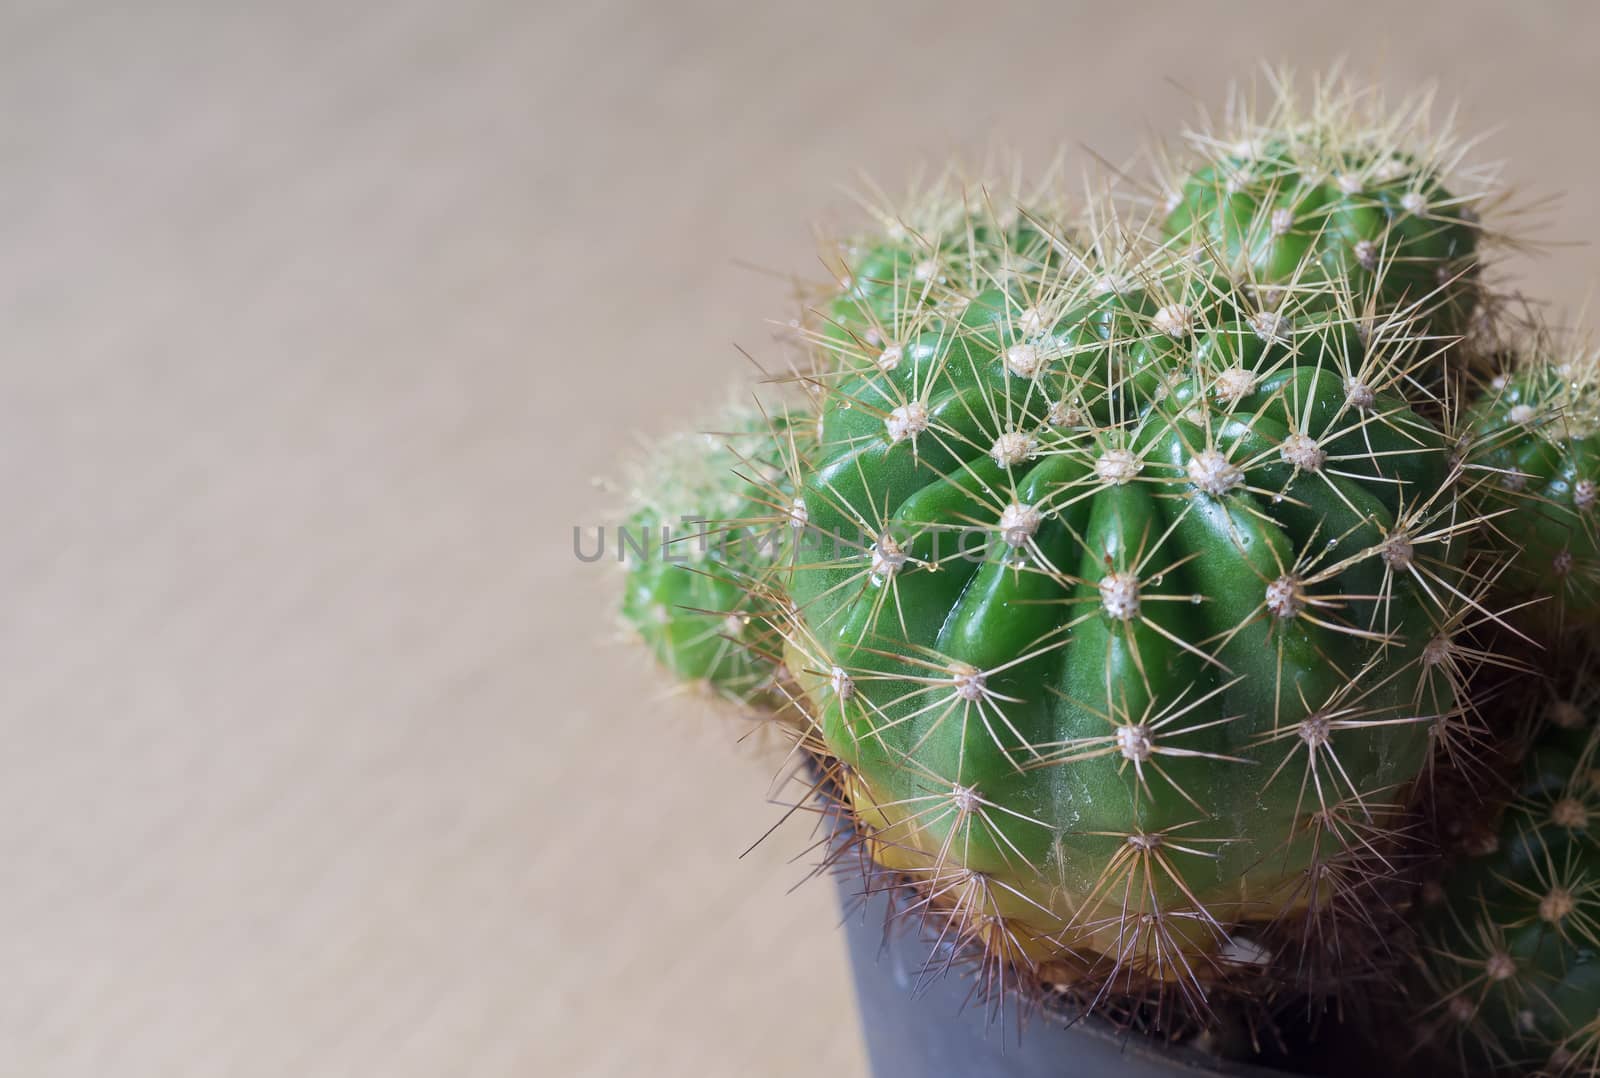 Cactus in black pot with shallow depth of field . Use for background